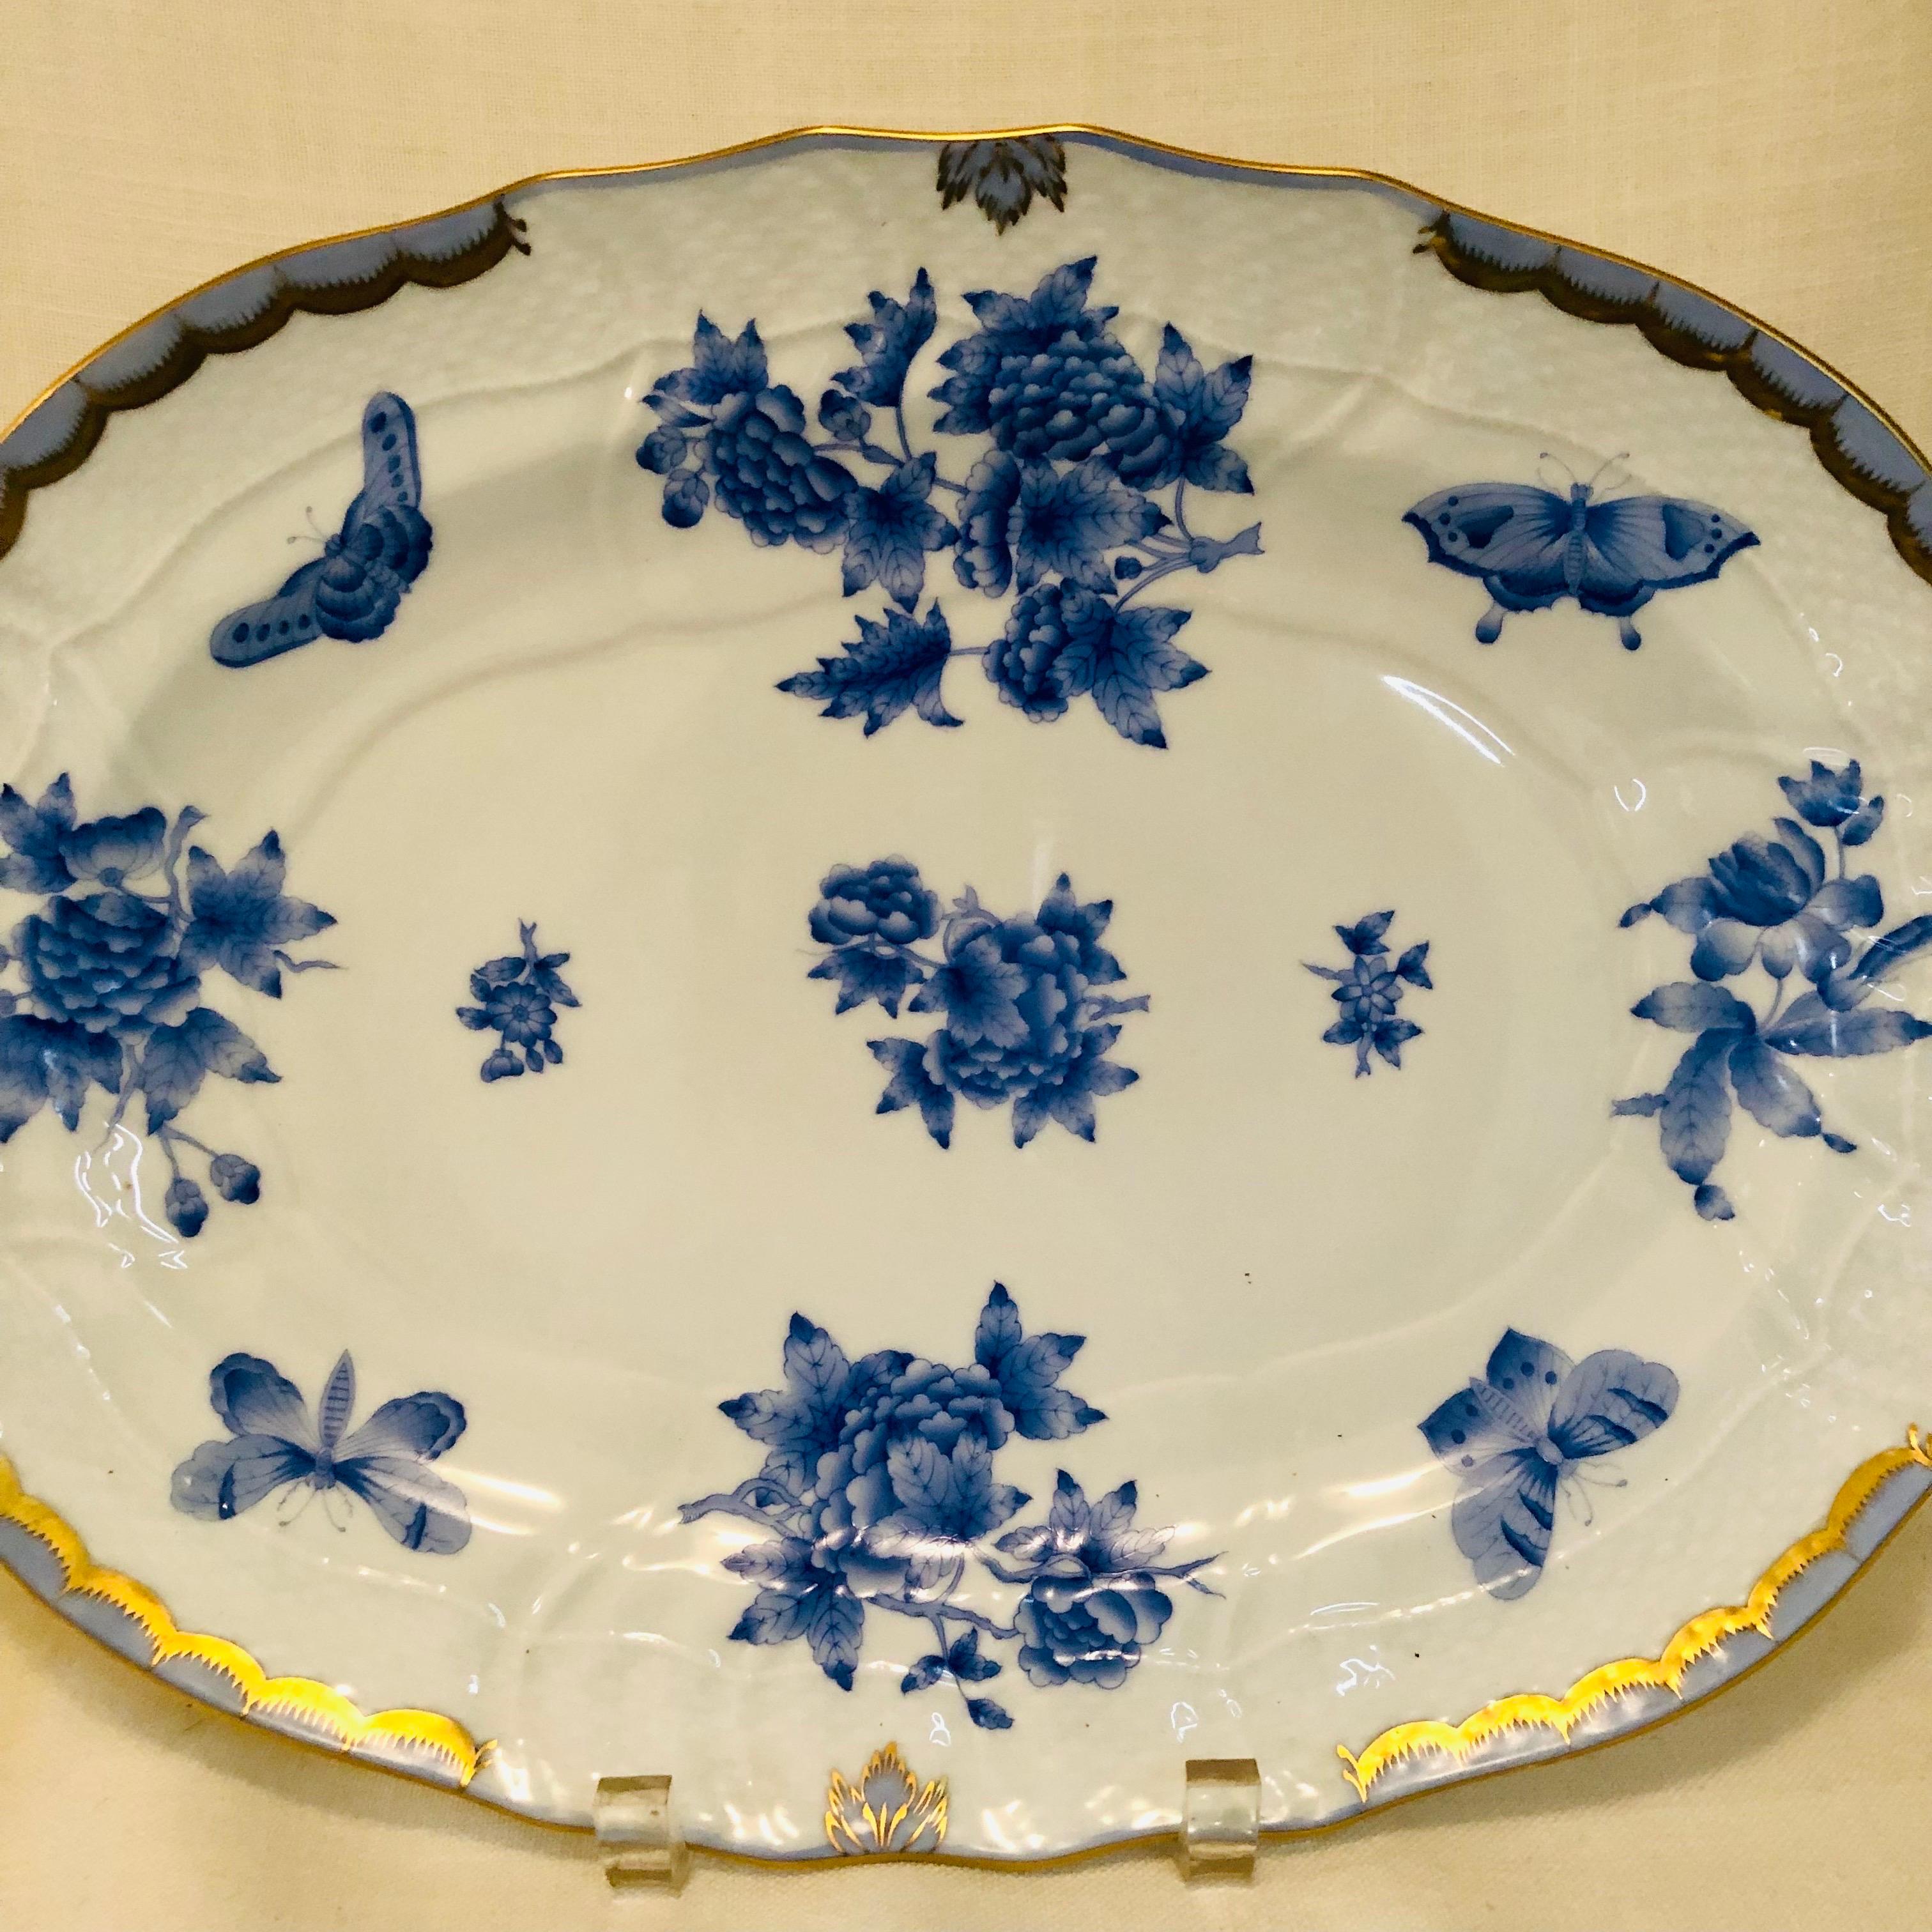 Late 20th Century Herend Fortuna Oval Platter Painted with Blue Butterflies and Flowers